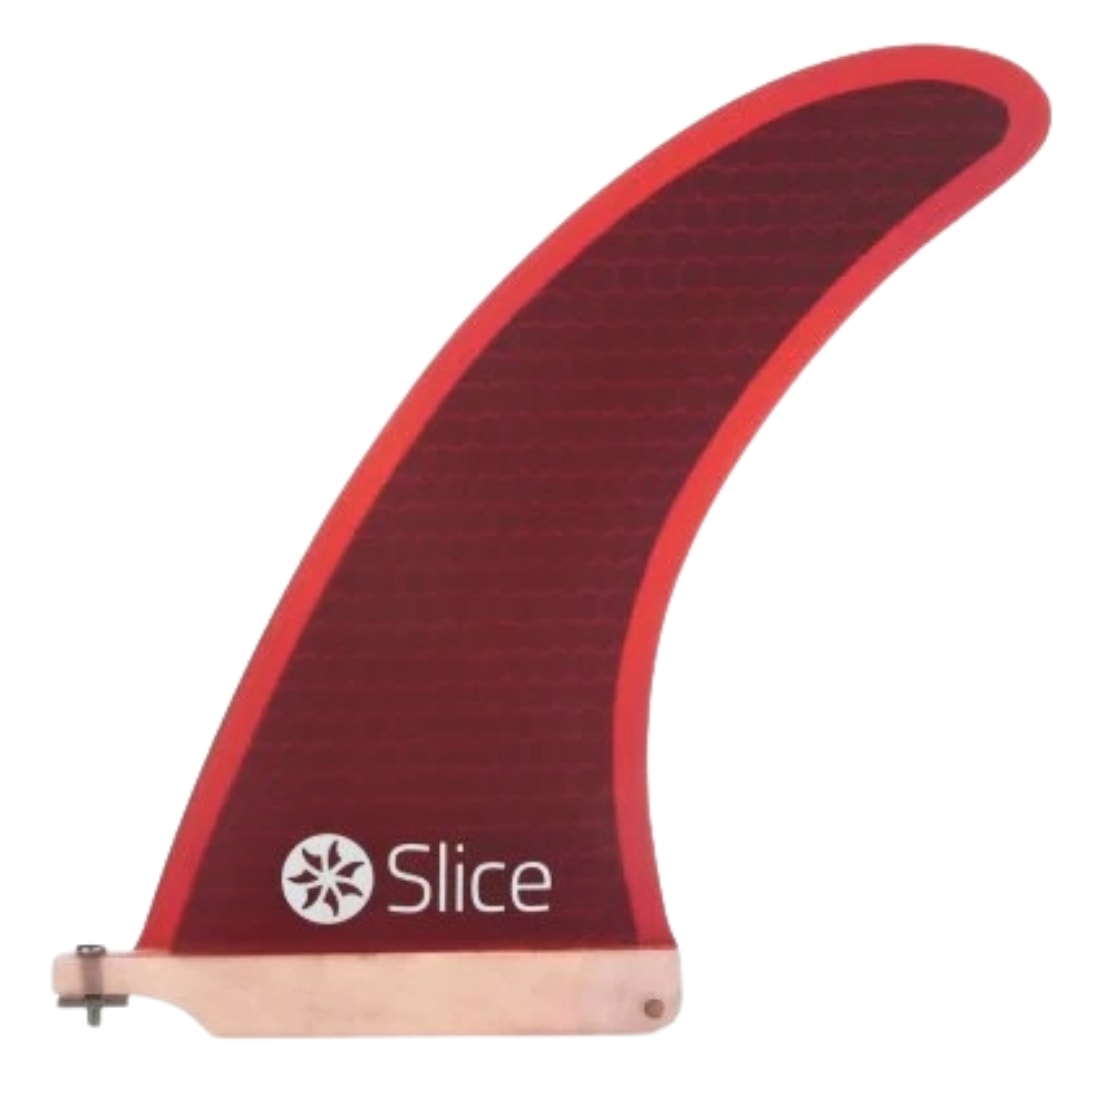 Northcore RTM Hexcore 9&quot; Longboard Surfbord Centre Fin - Red